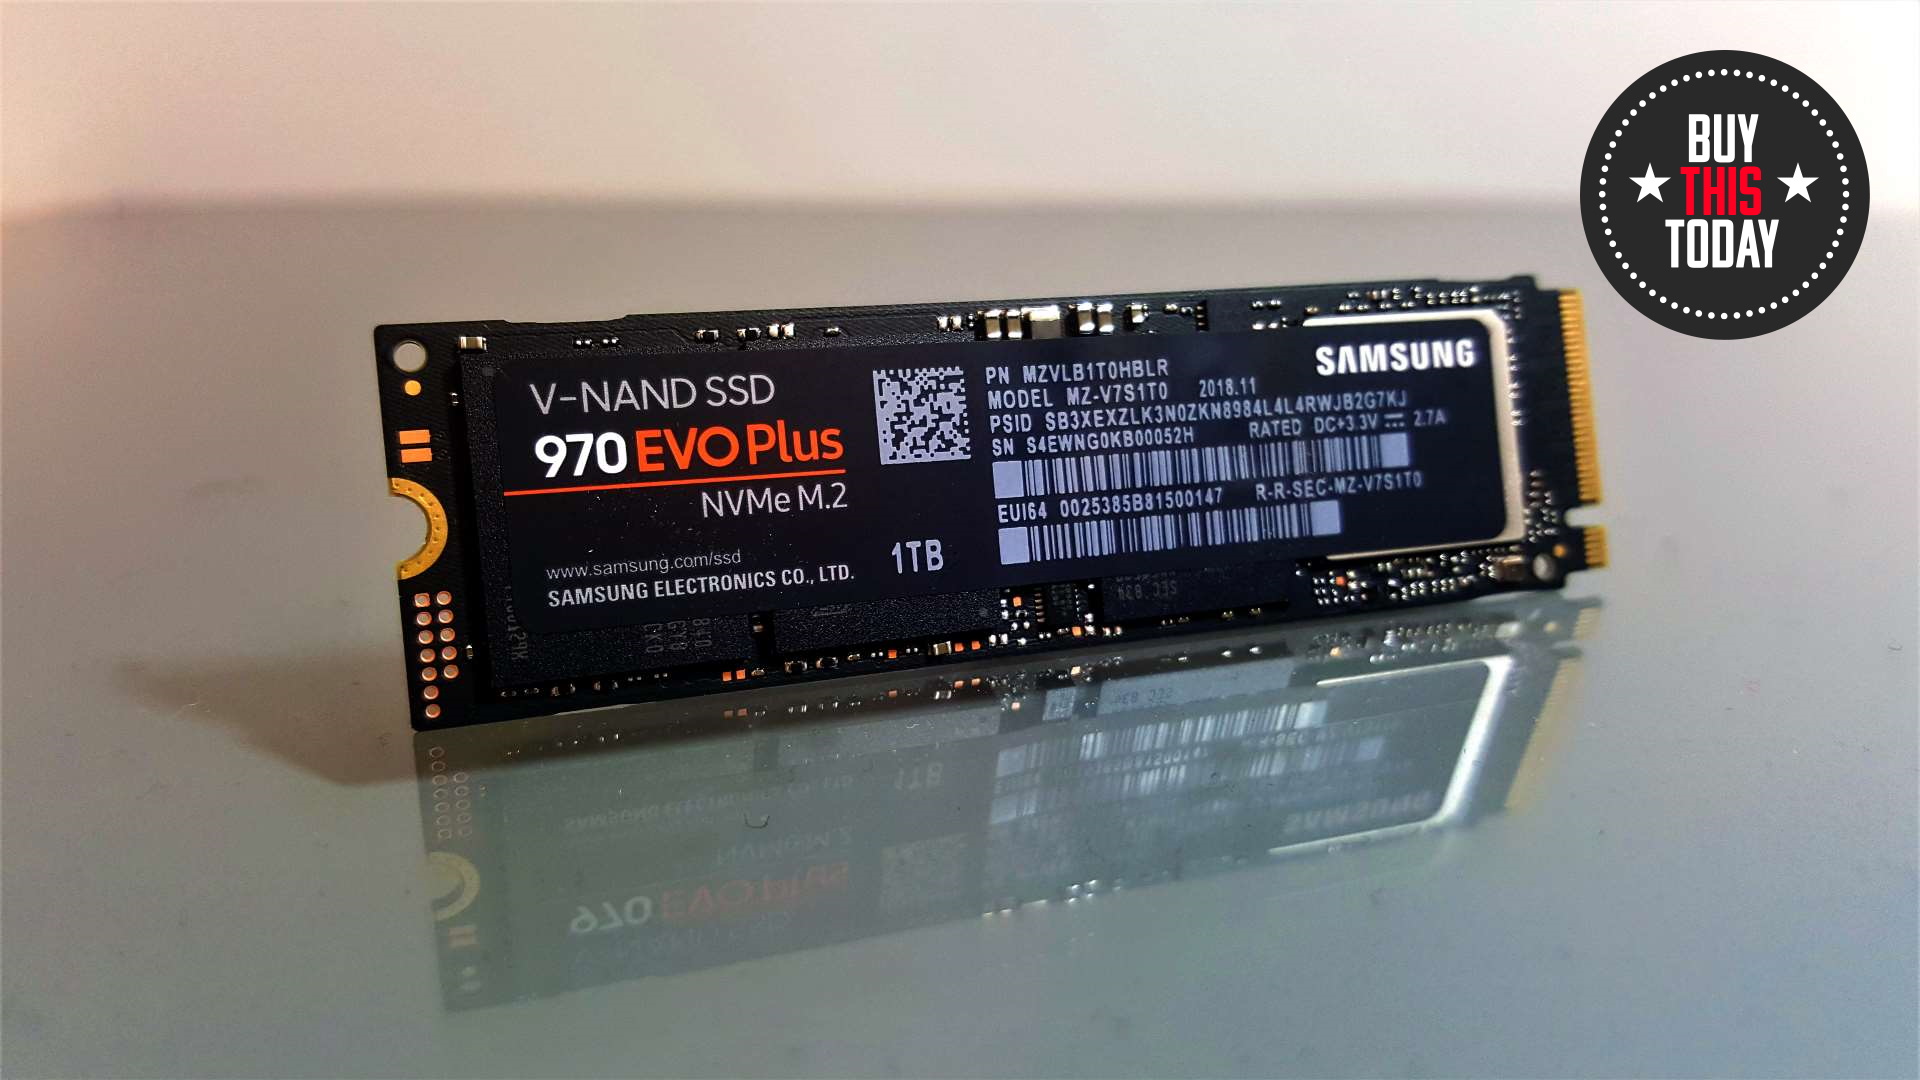 Buy this today: save 24% on a Samsung 970 Evo Plus 1TB SSD